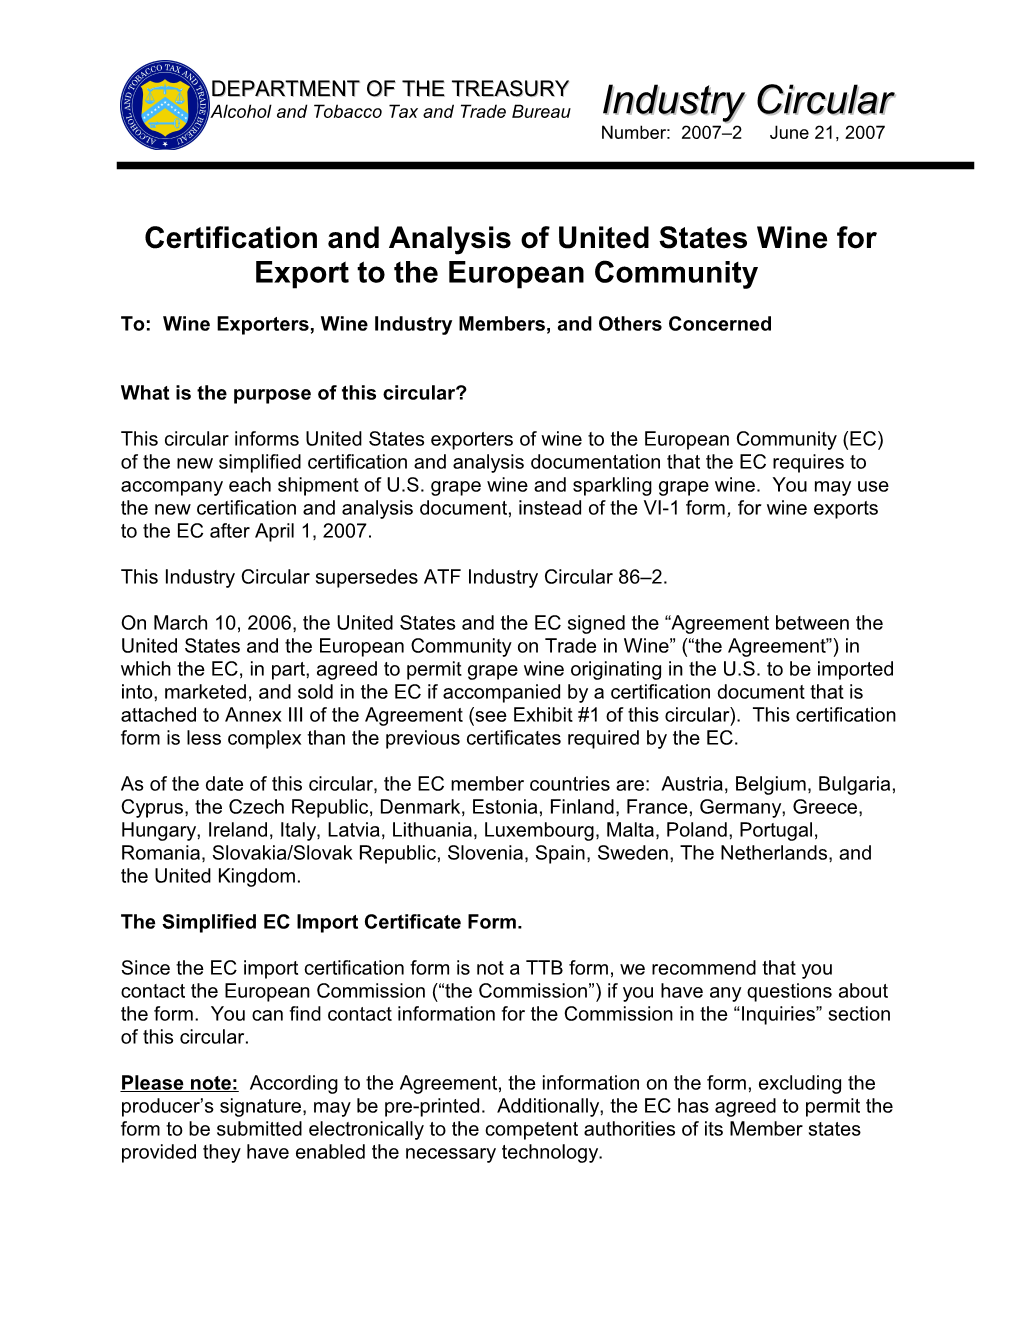 To: Wine Exporters, Wine Industry Members, and Others Concerned